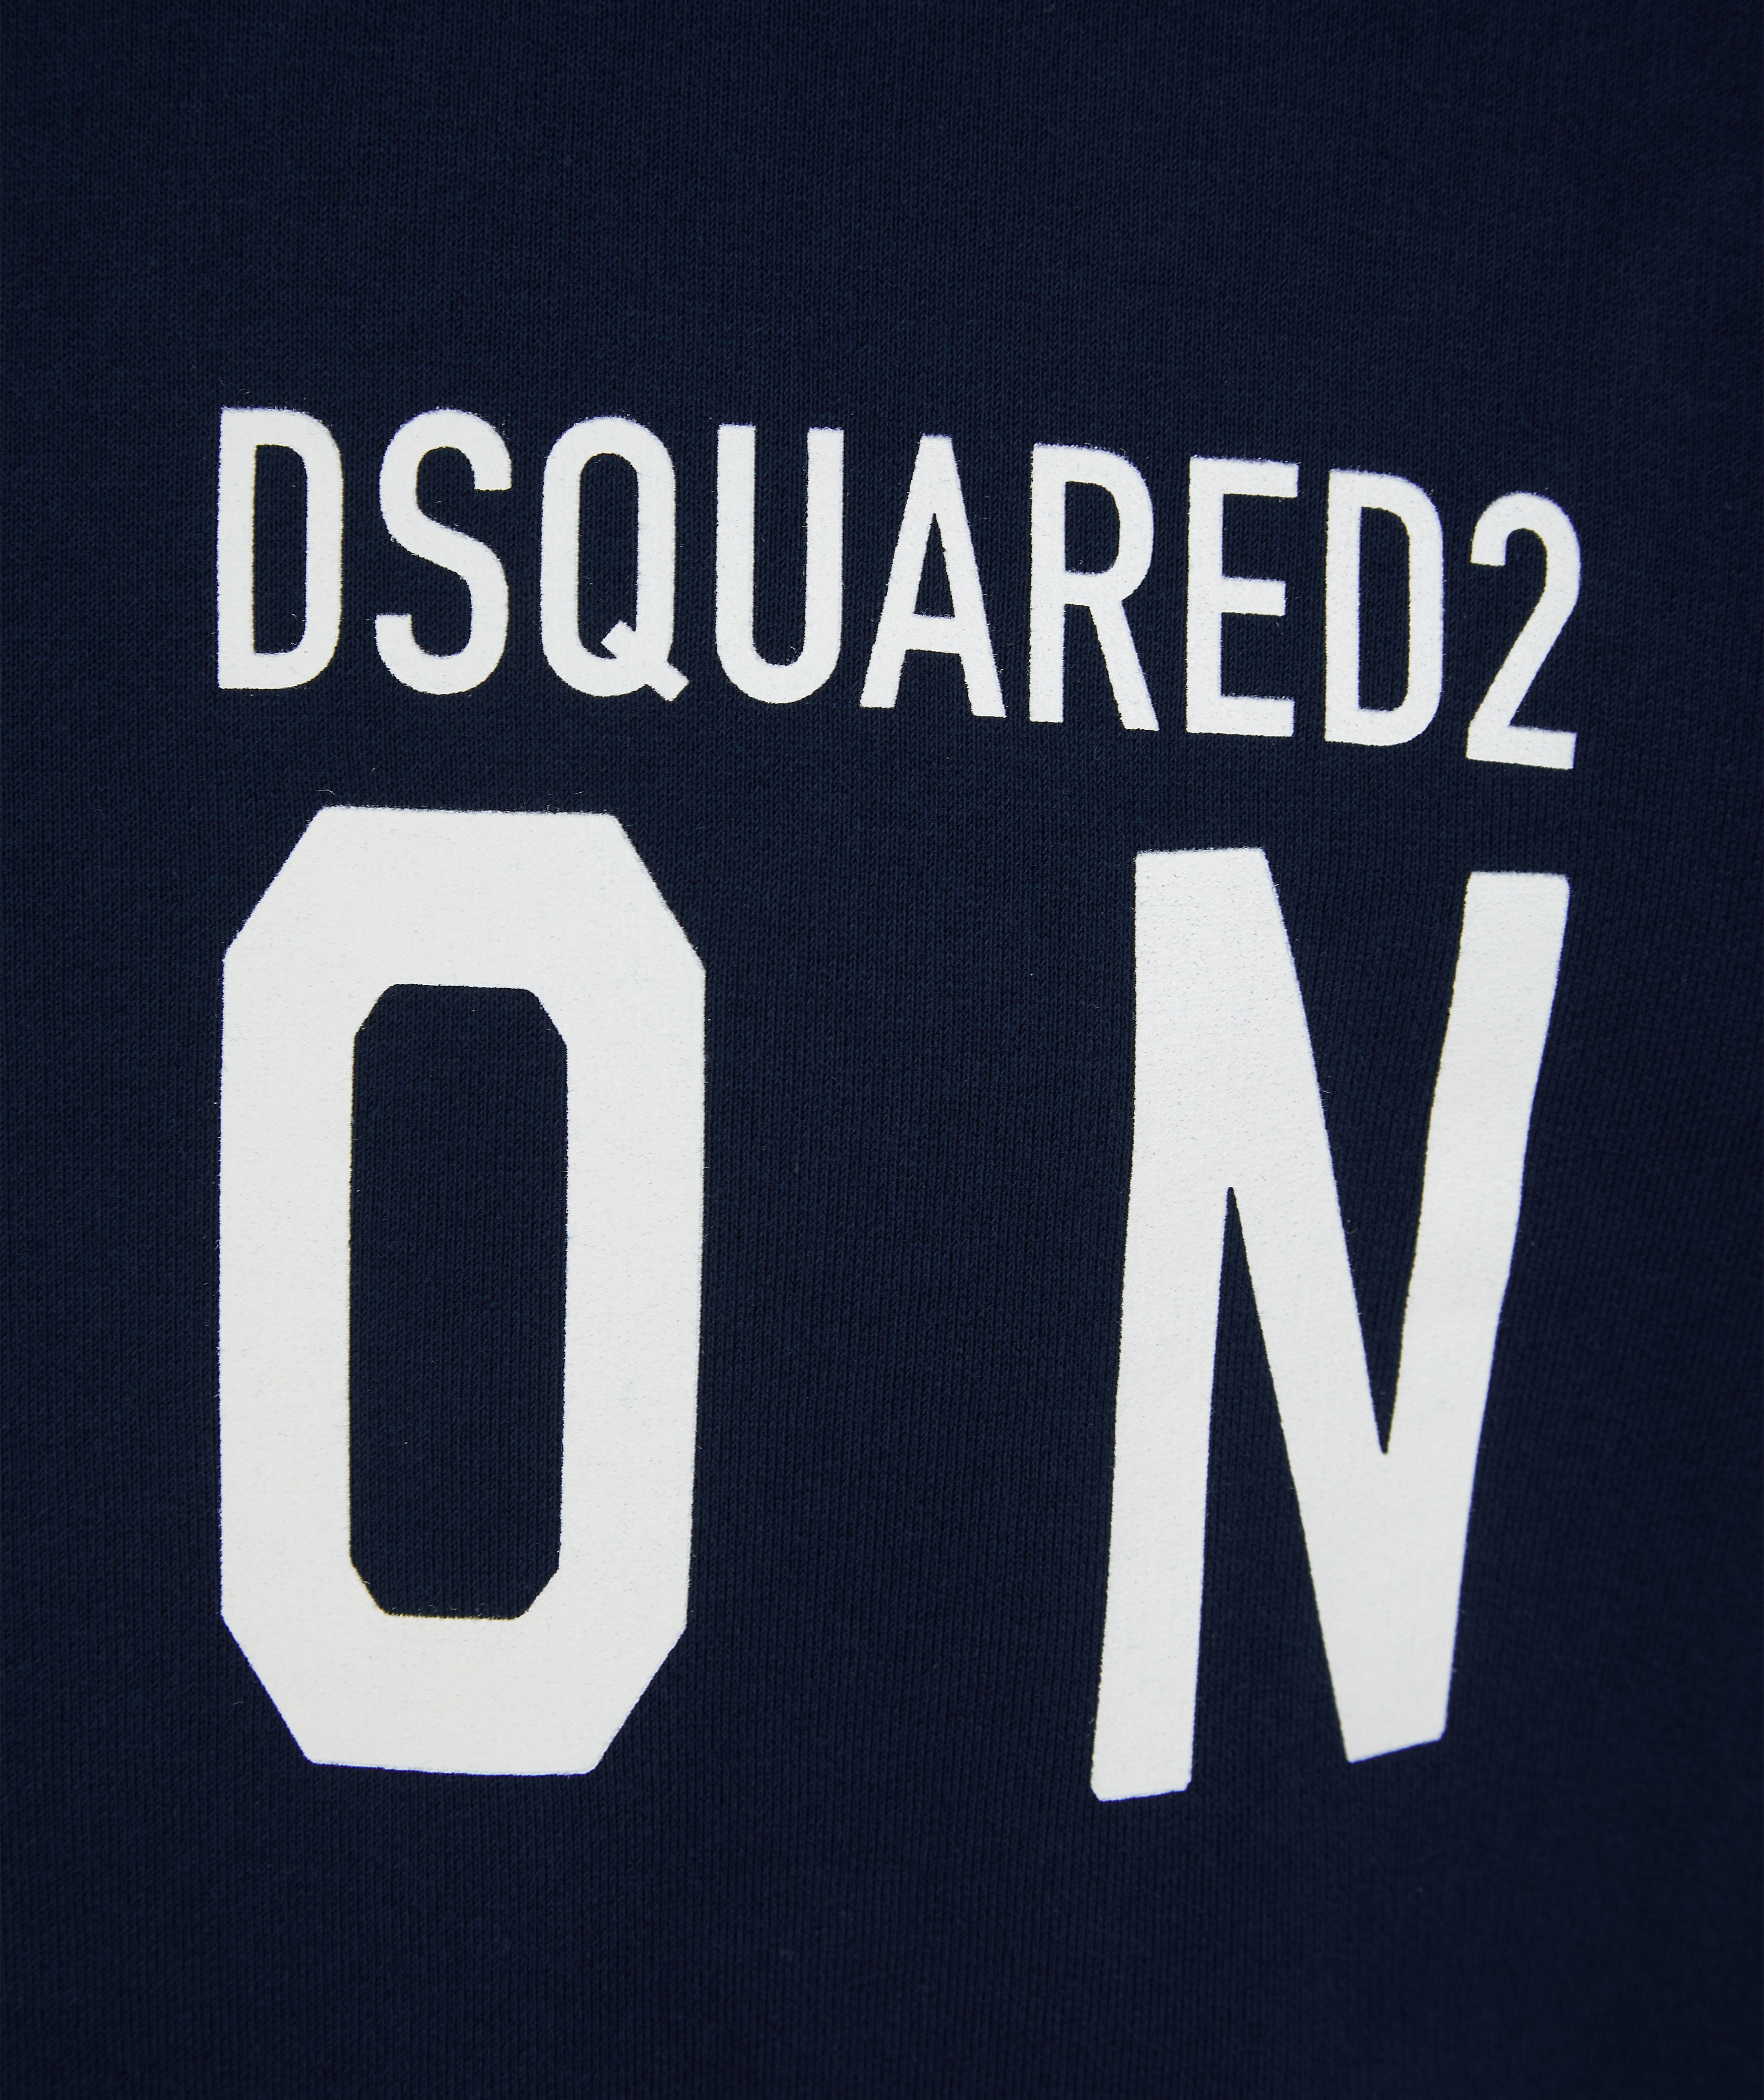 Load image into Gallery viewer, DSquared2 Icon Hoody Navy
